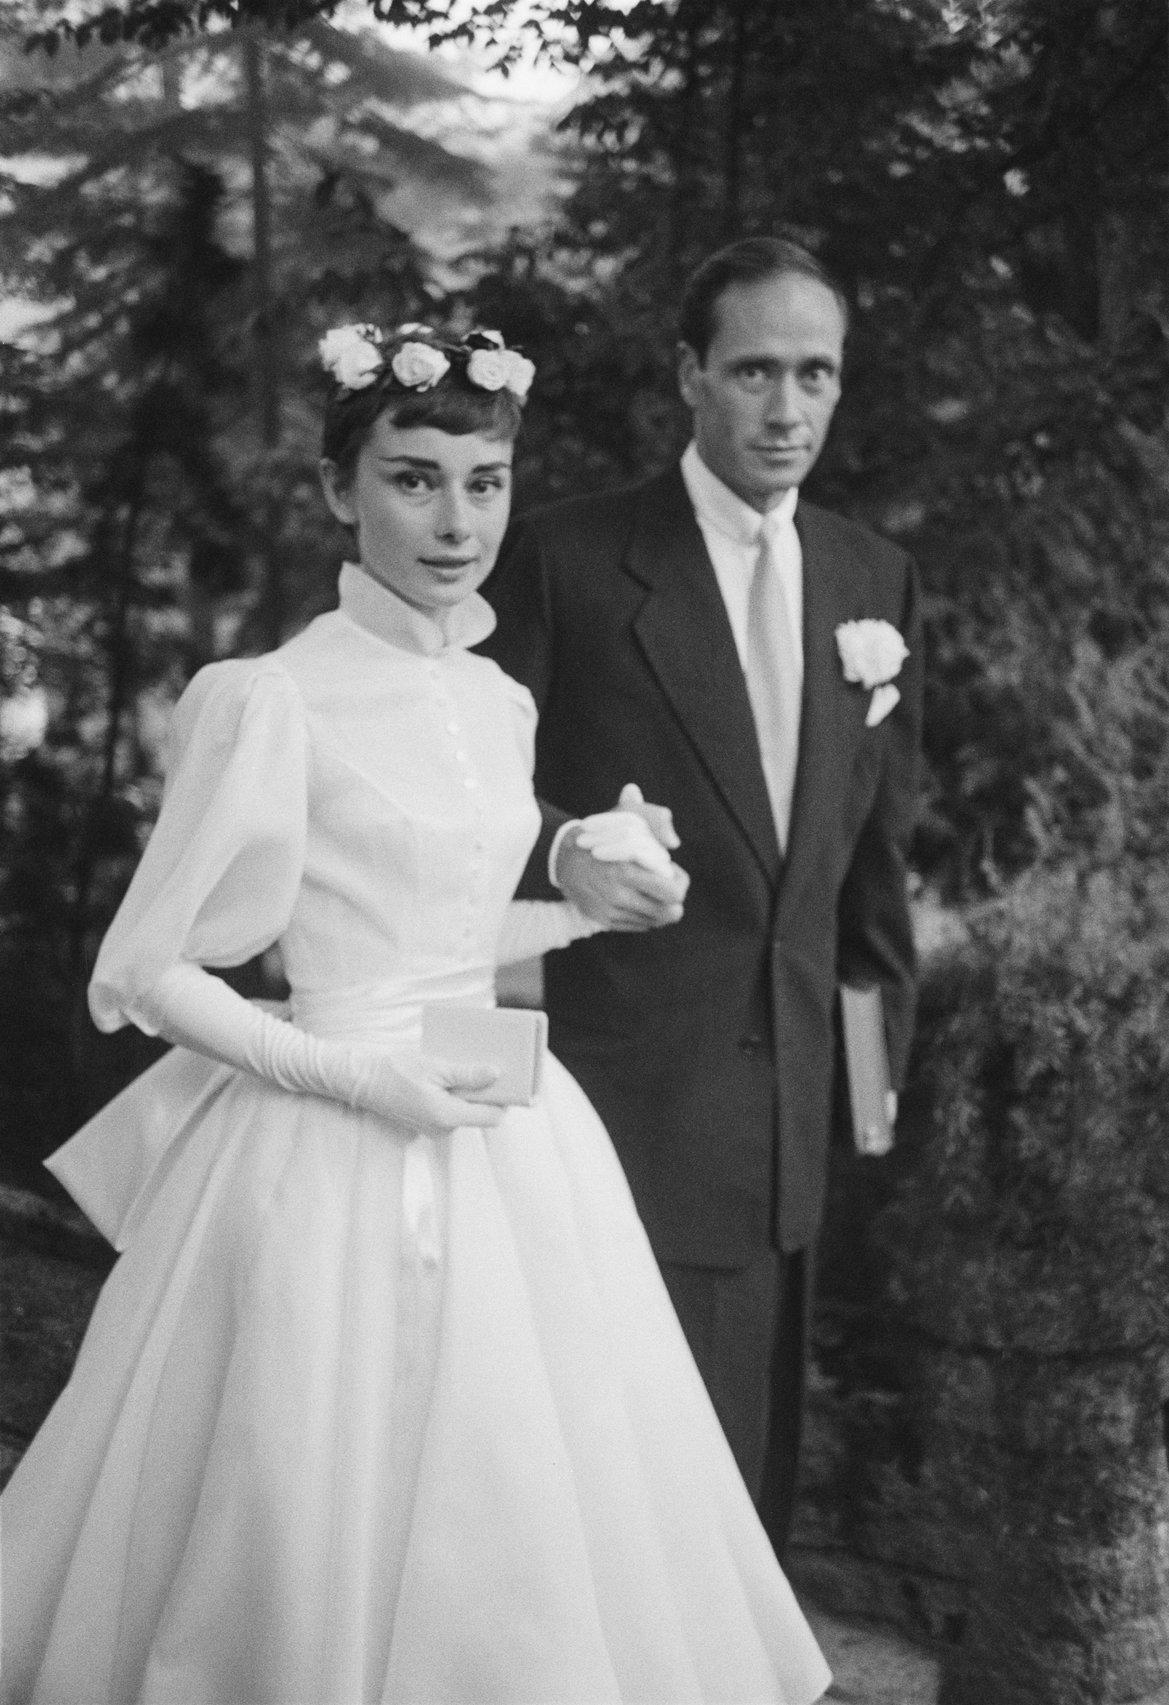 My grandmother modeling a Christian Dior wedding gown in the